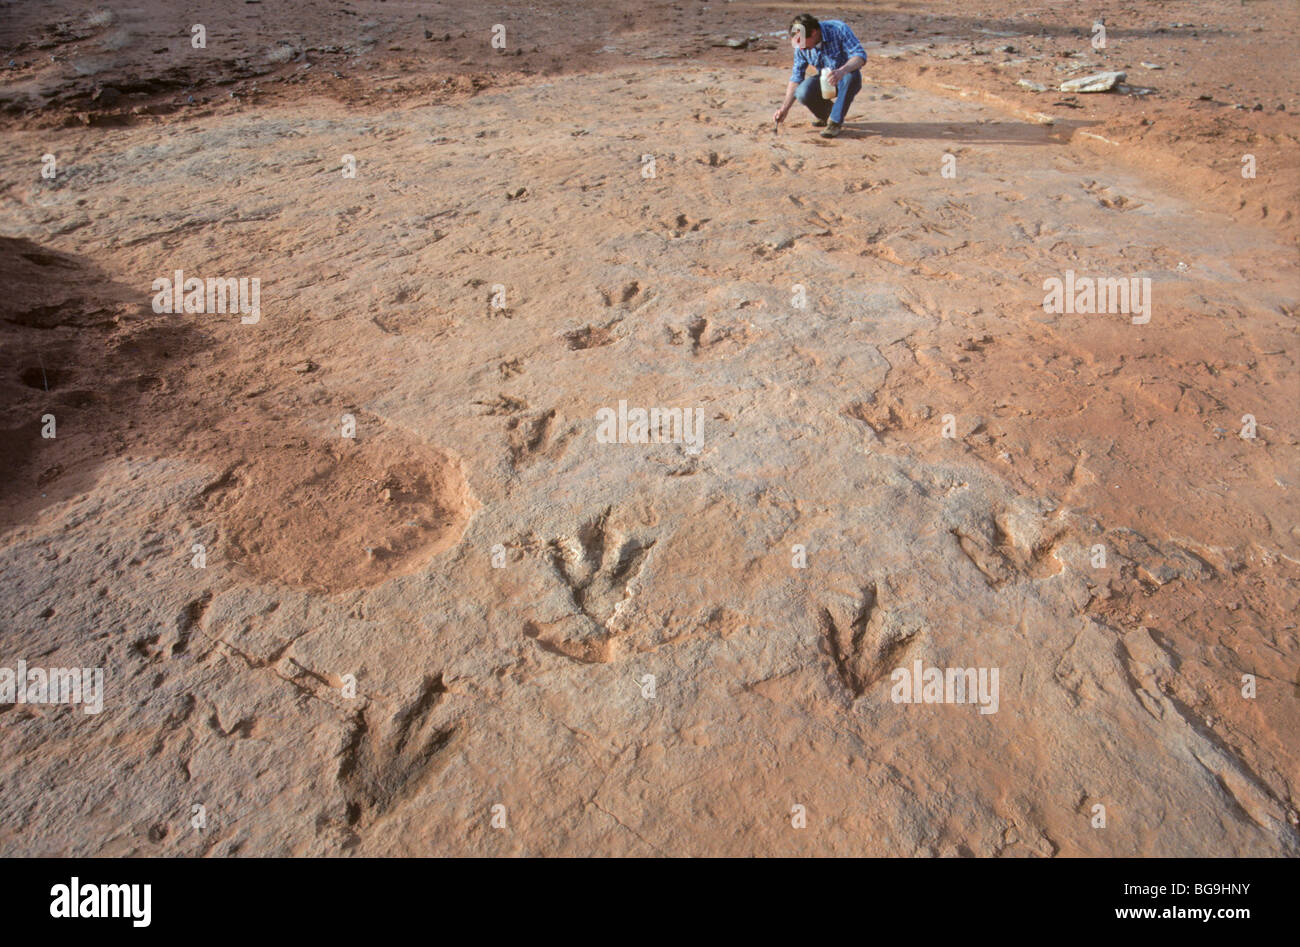 Paleontologist examines dinosaur tracks in Moenave Formation in the Painted Desert area of  Navajo Indian Nation, Arizona Stock Photo